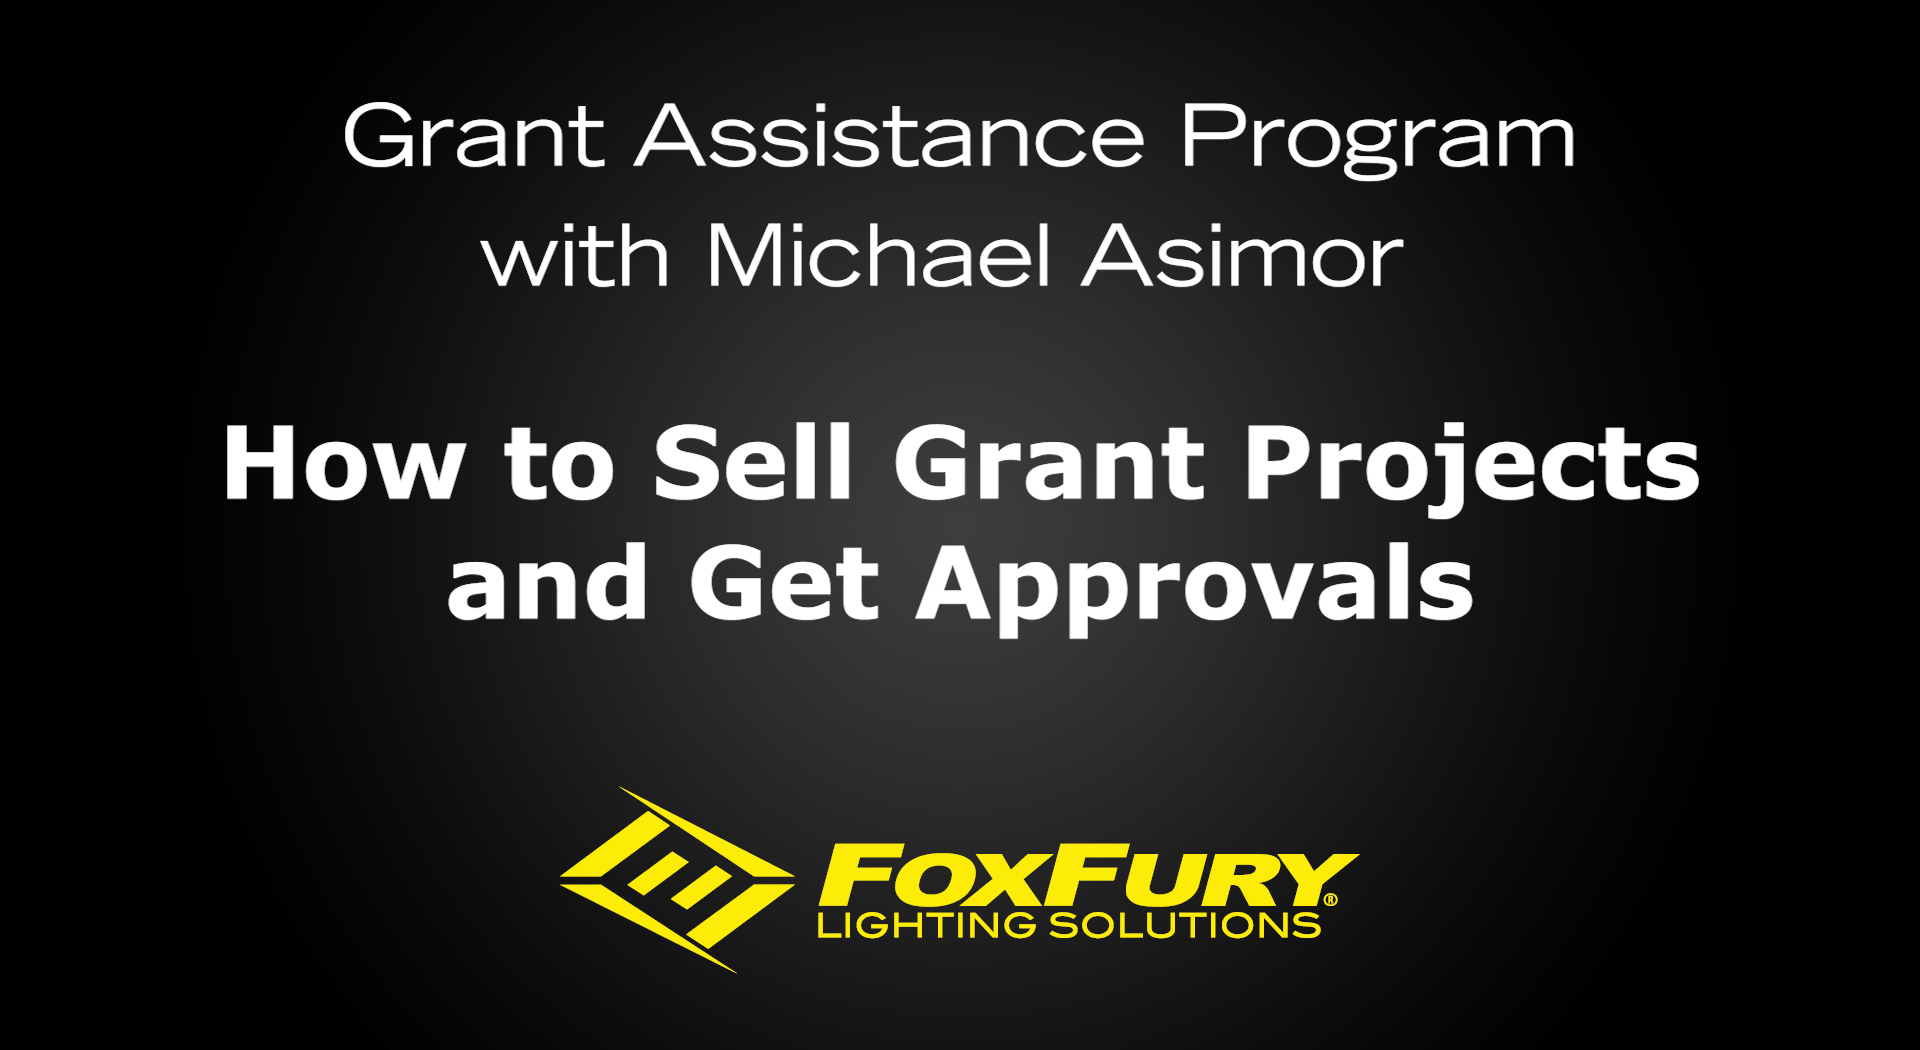 How to Sell Grant Projects and Get Approval video